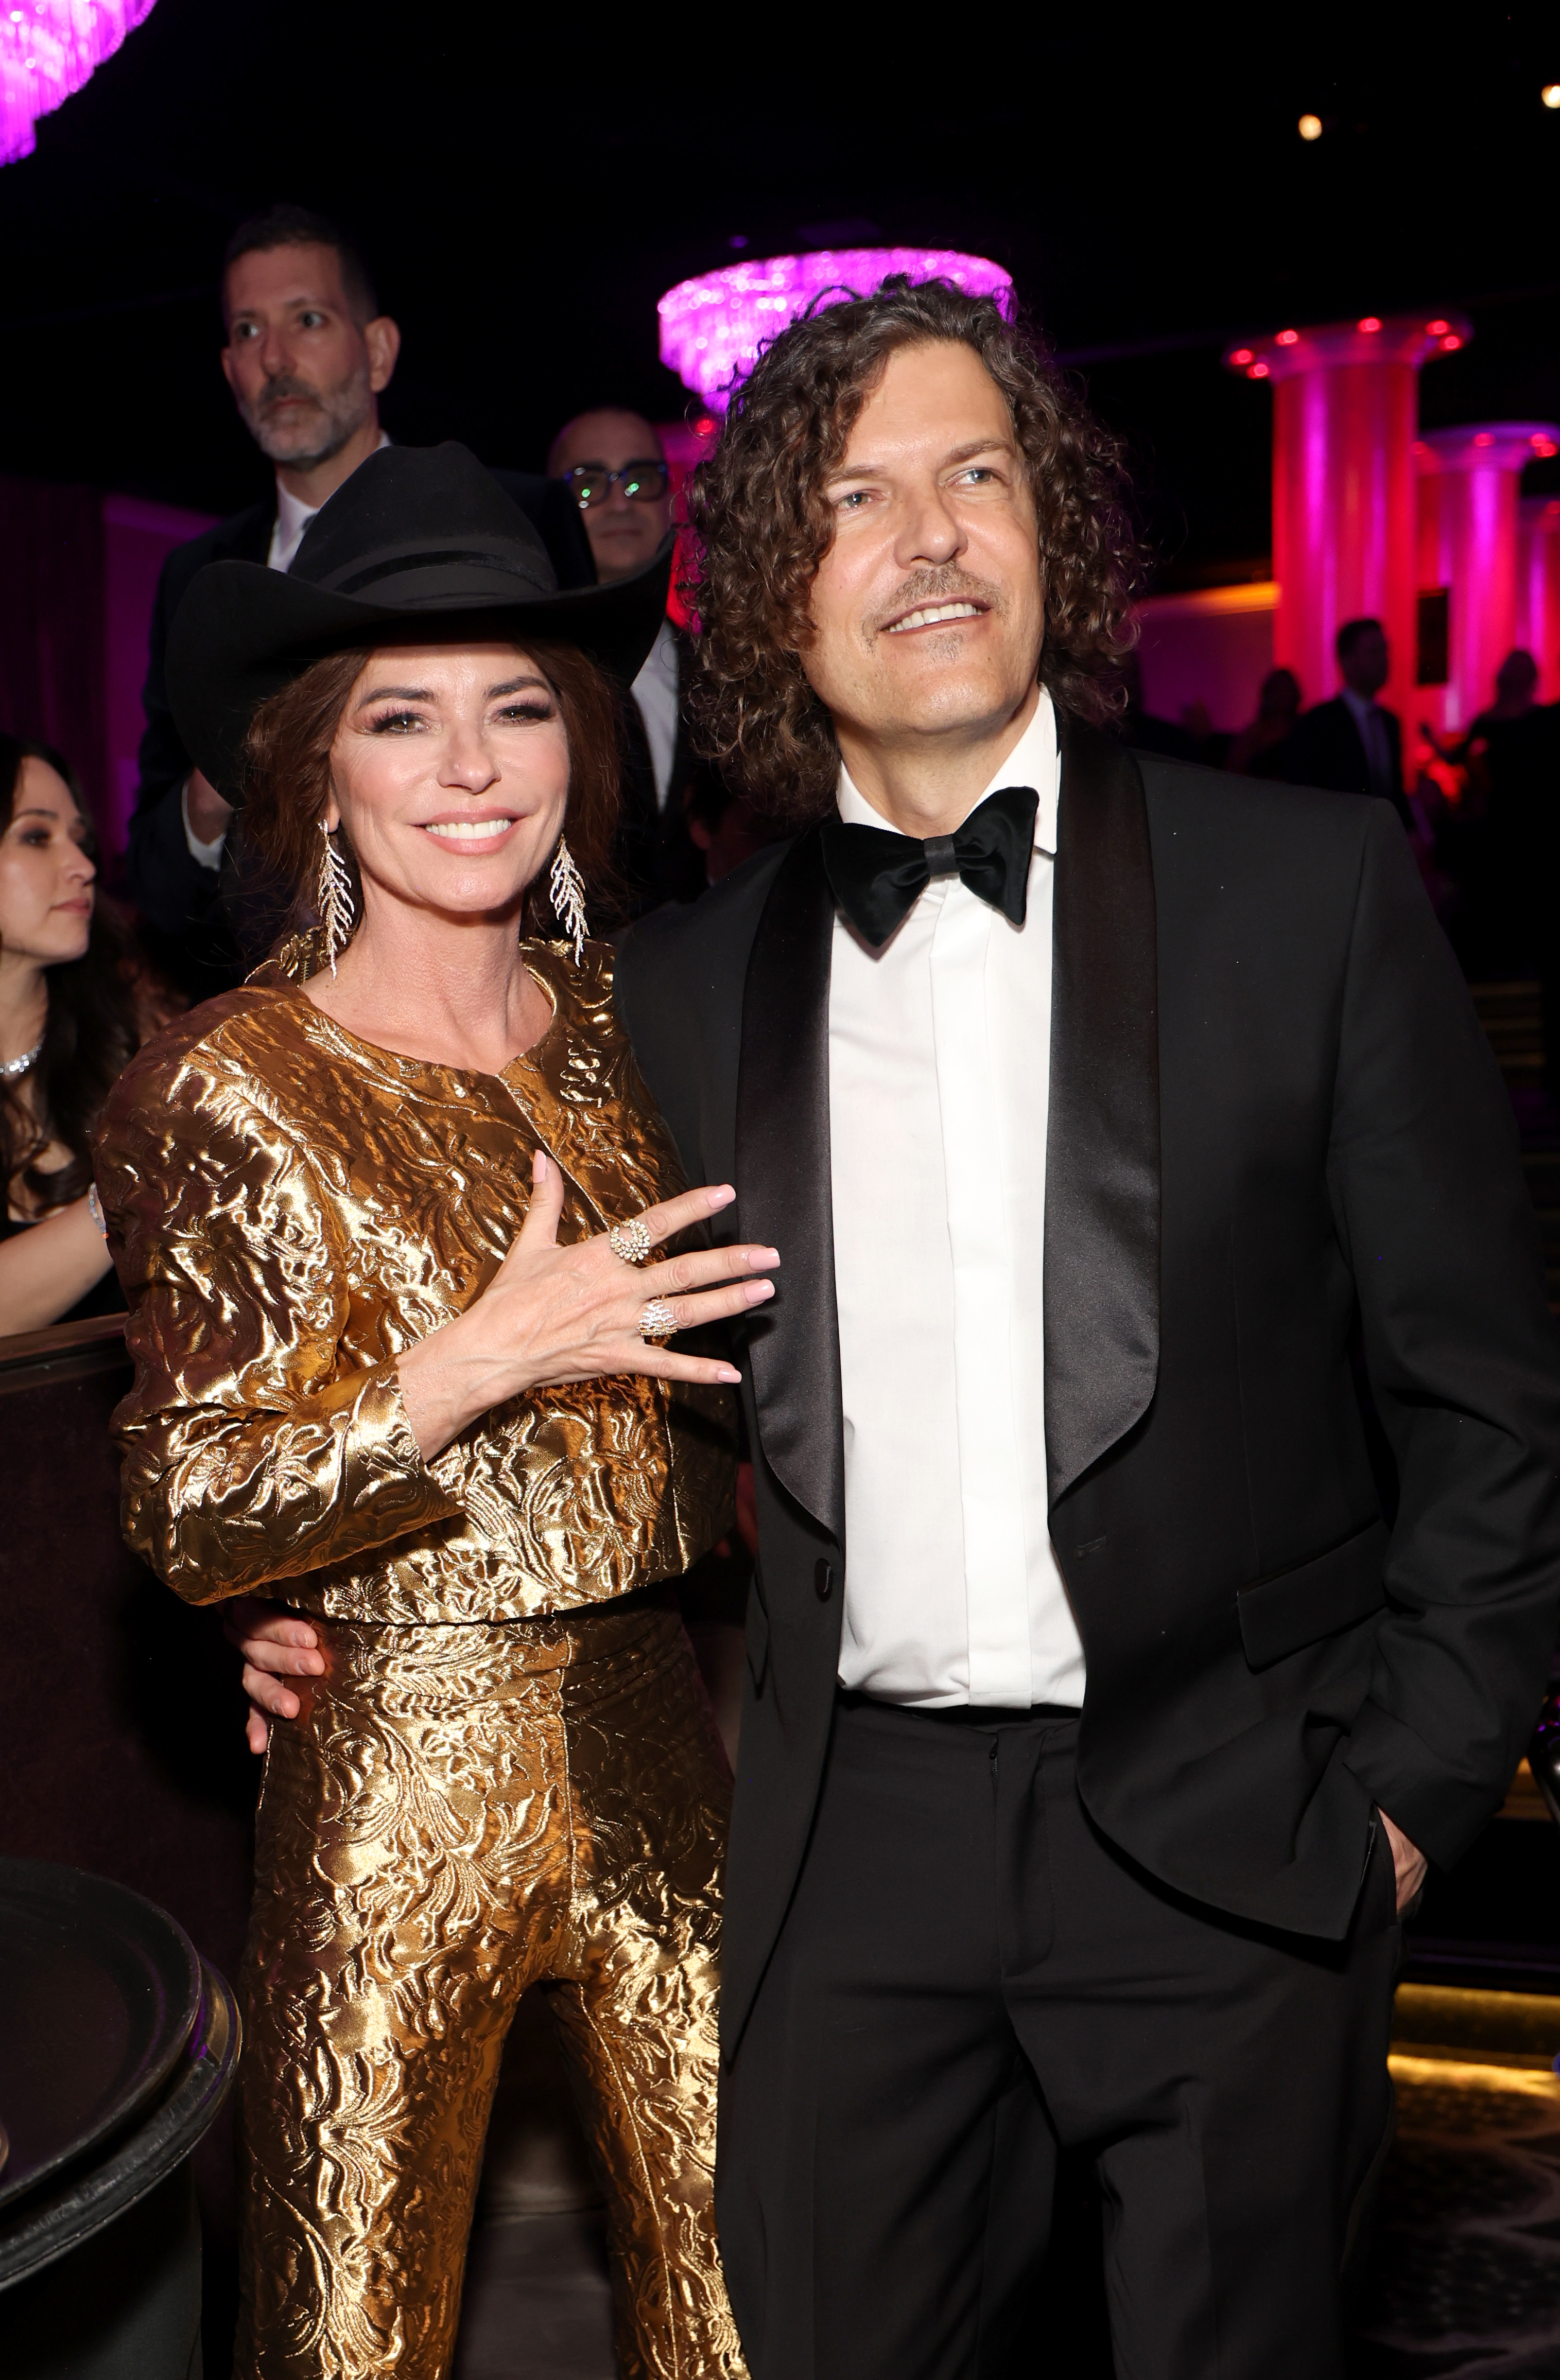 Shania Twain and Frédéric Thiébaud pictured together at a pre-Grammy party in February 2024